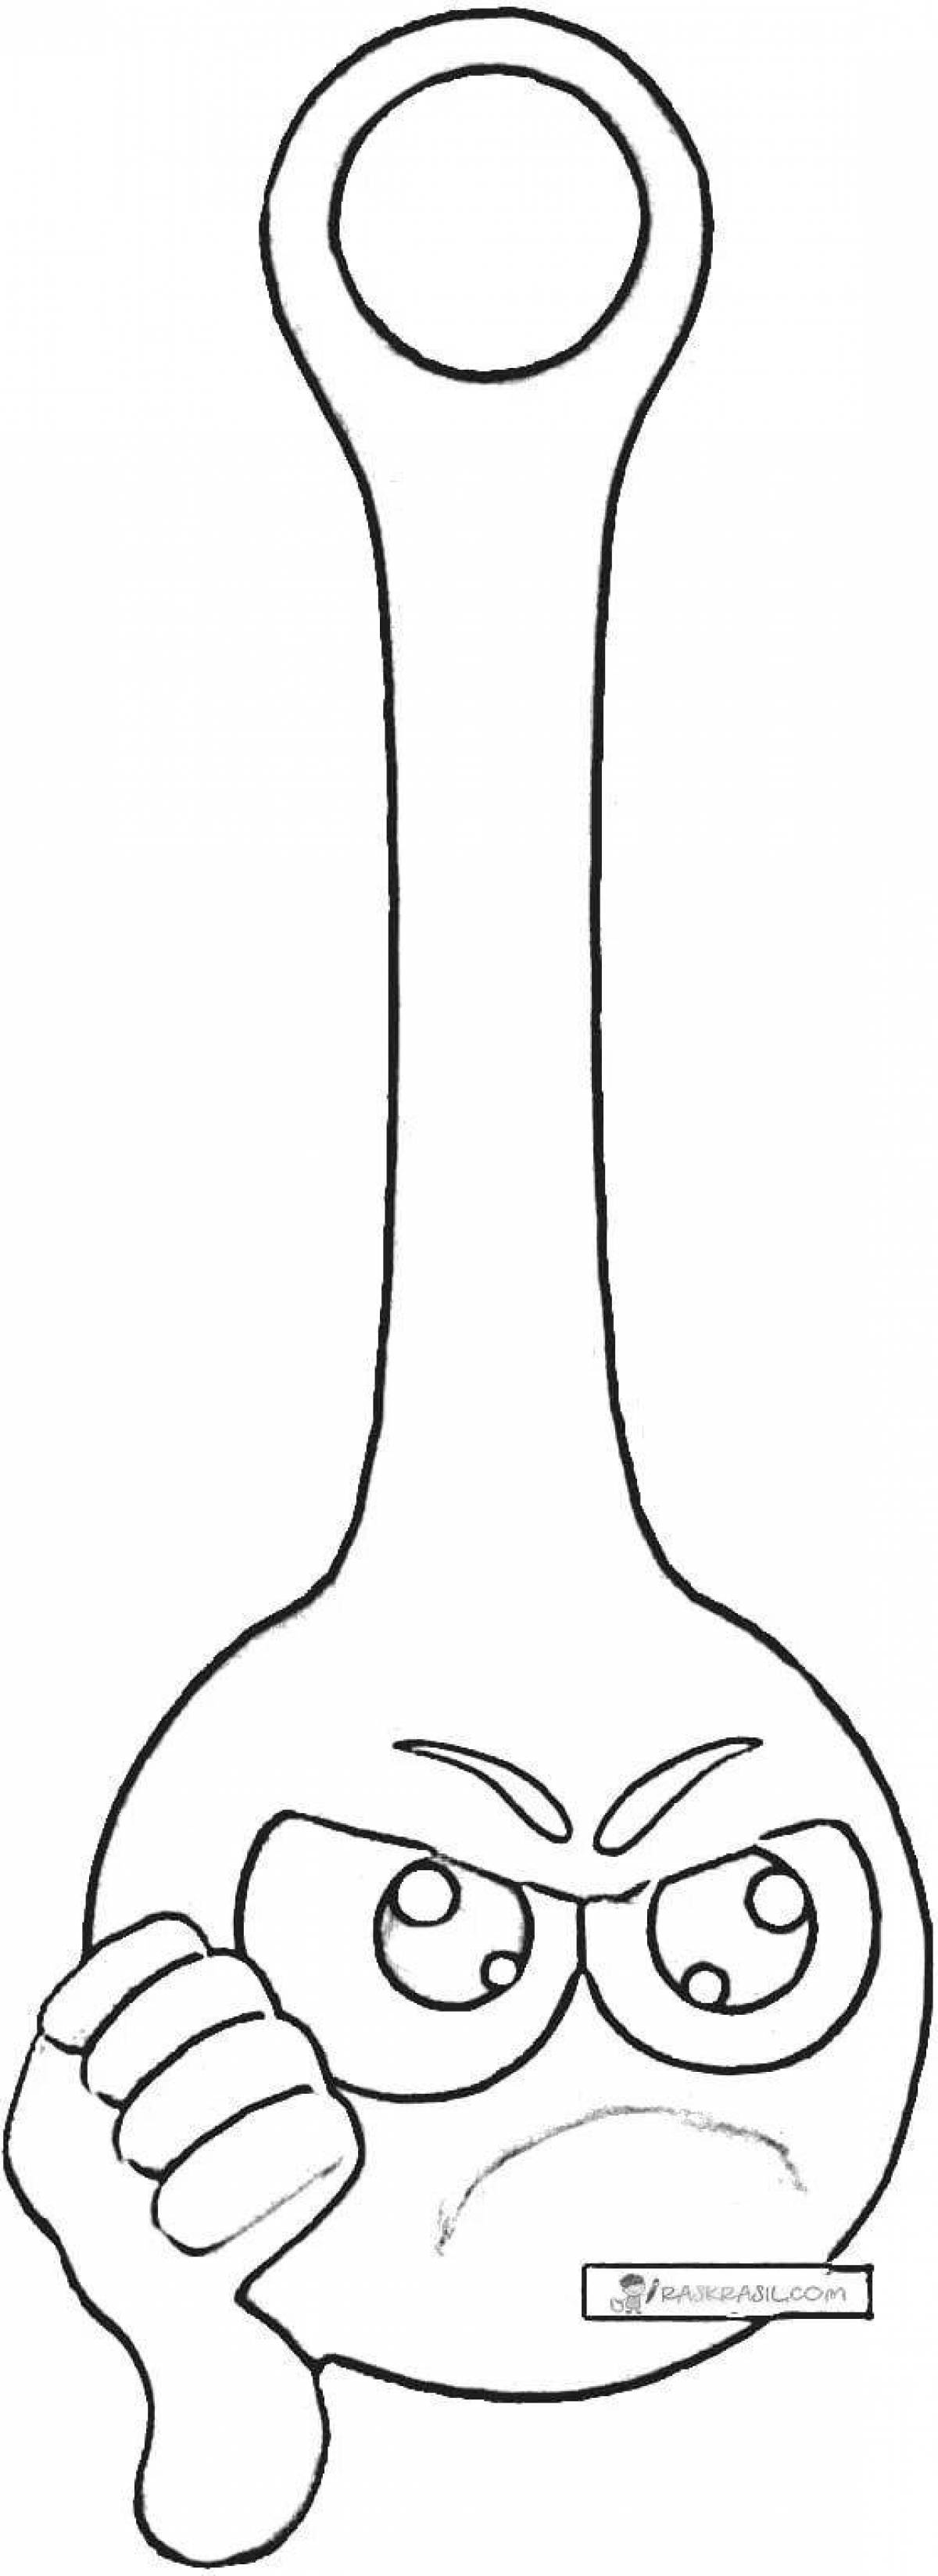 Tempting fasteners coloring page